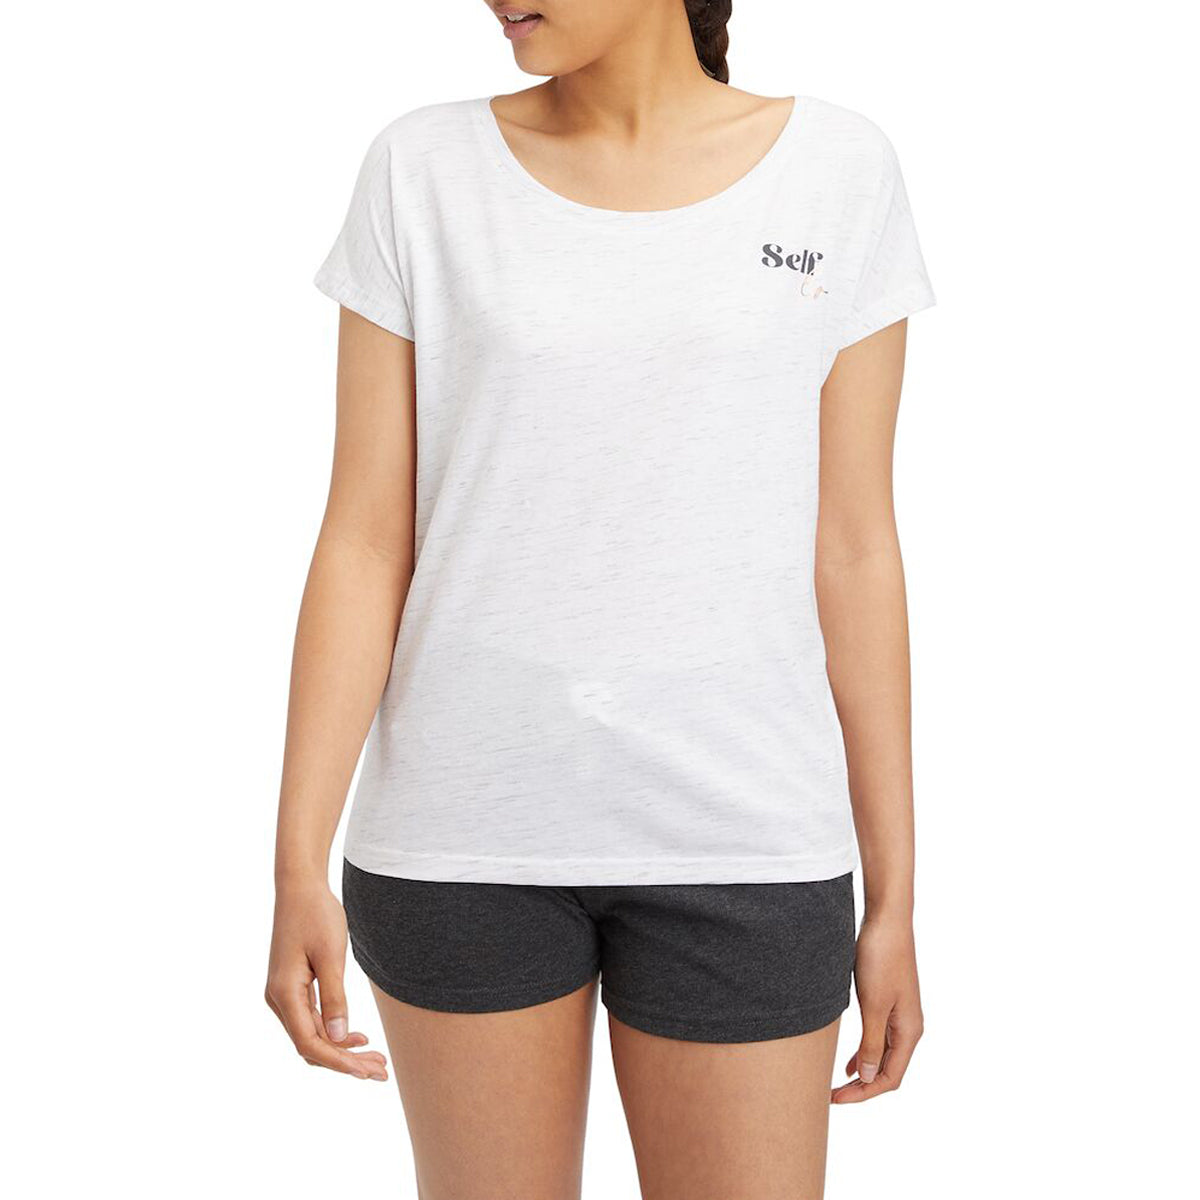 Energetics Cully Lifestyle T-Shirt For Women, White